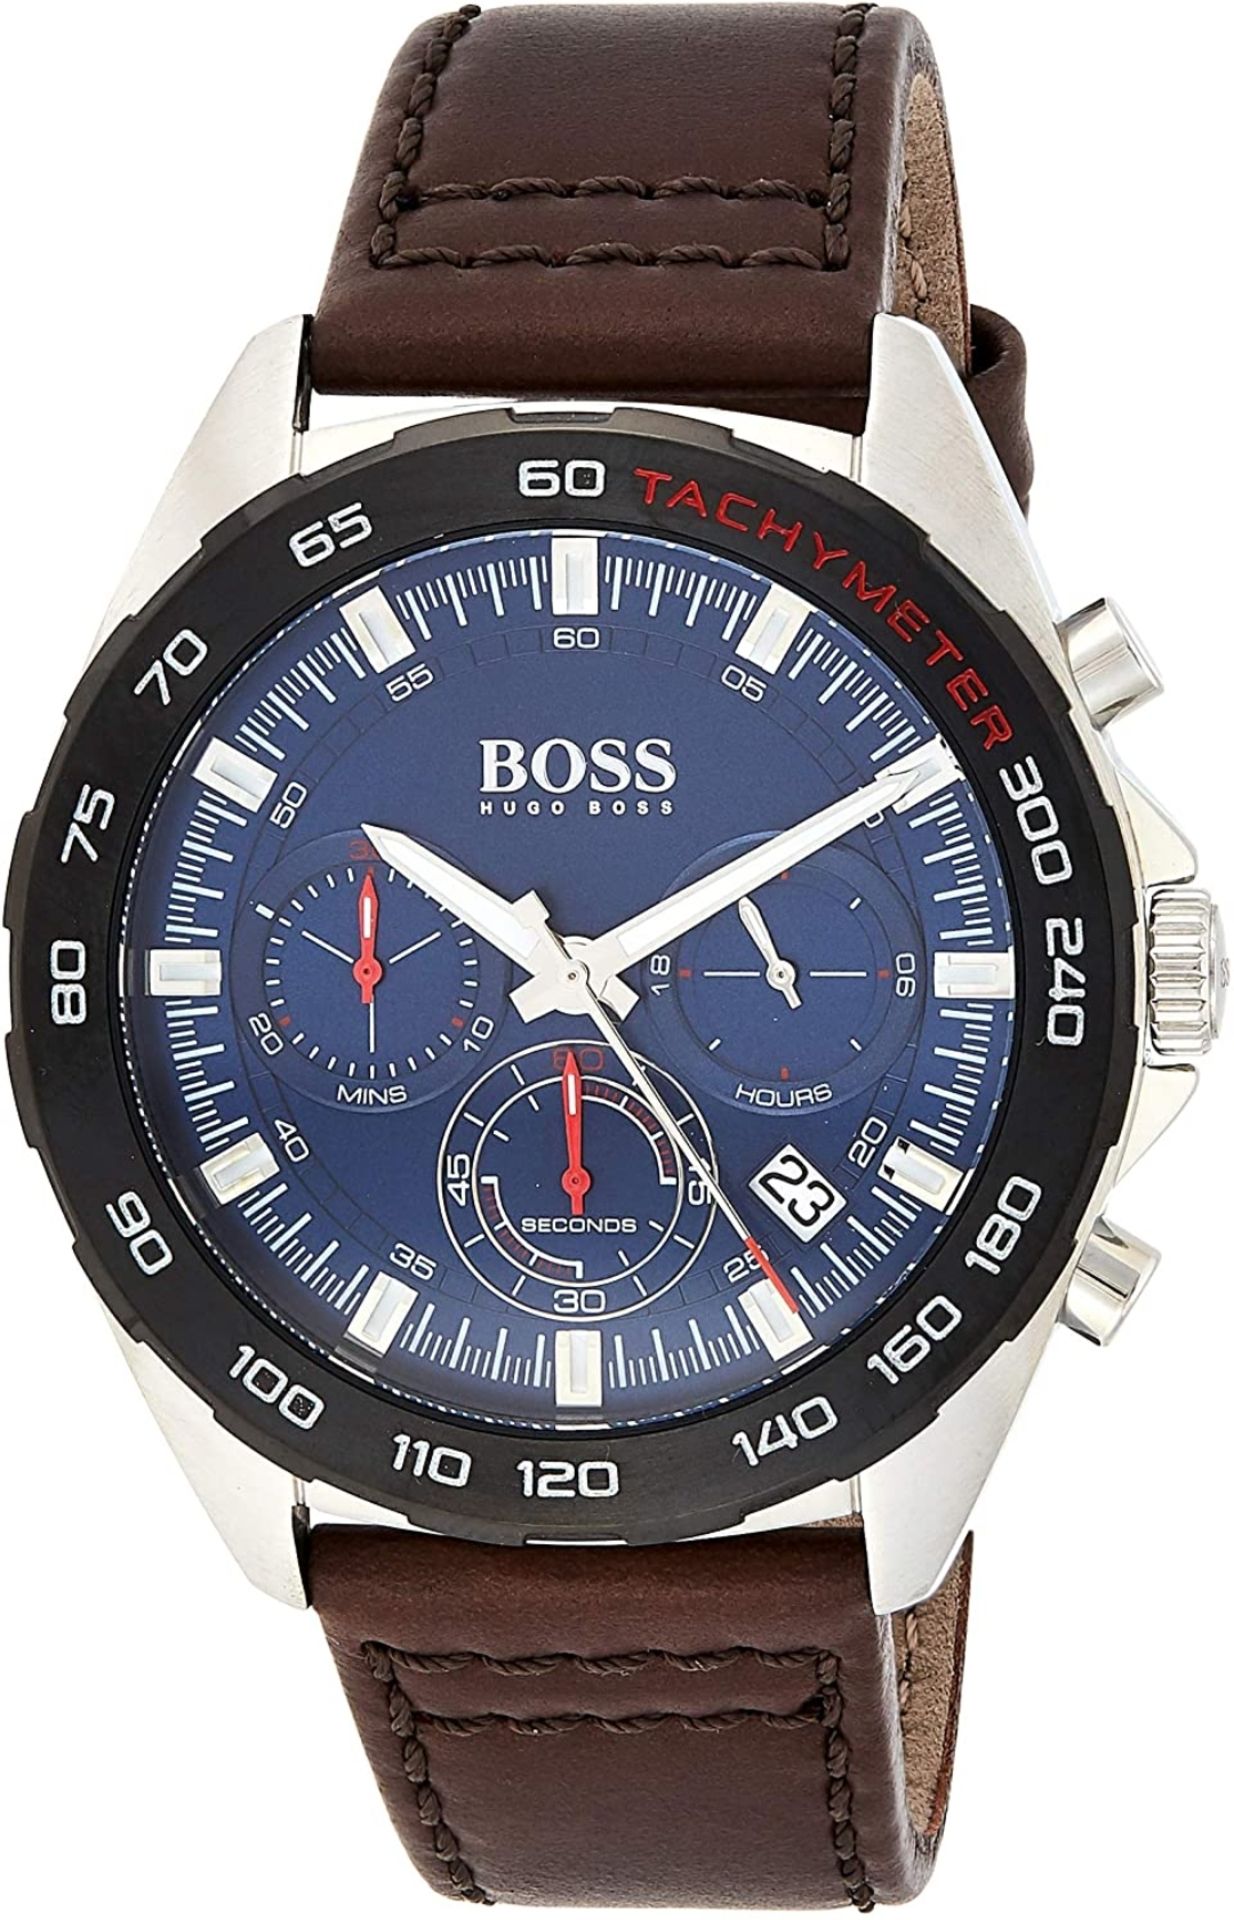 Hugo Boss 1513663 Men's Intensity Brown Leather Strap Chronograph Watch - Image 2 of 4